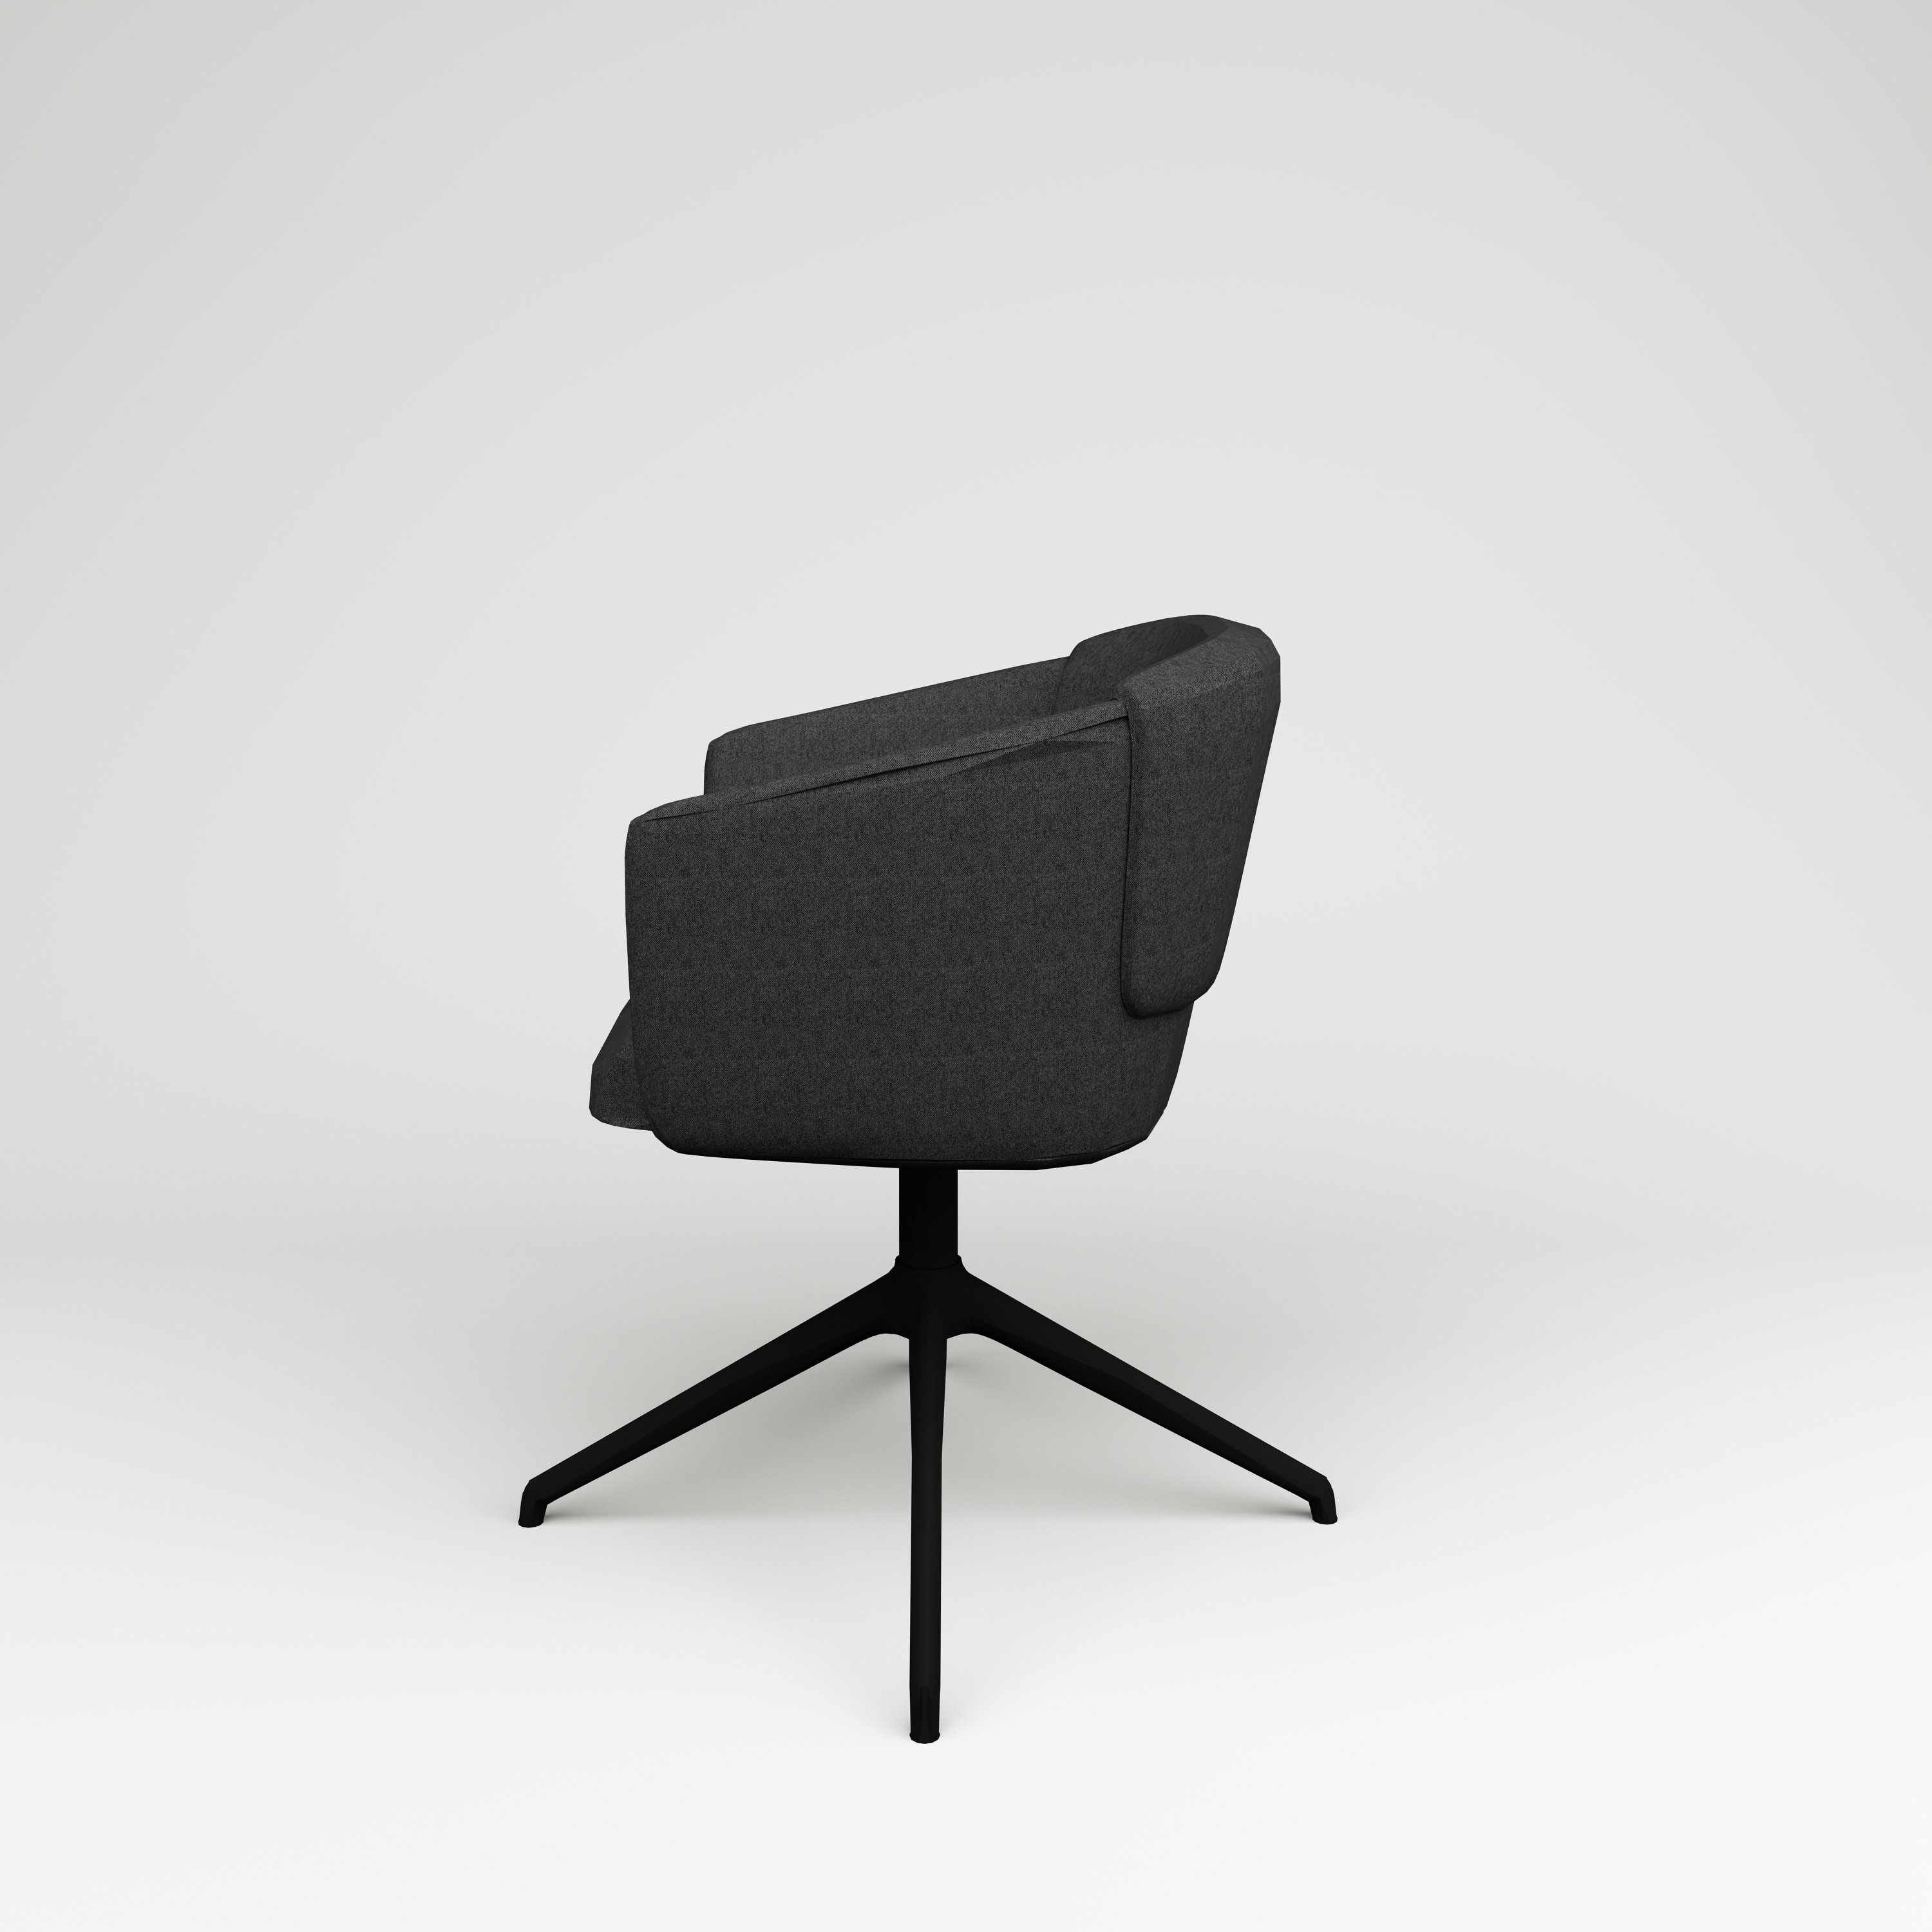 Conference chair Norma on black cross stand, graphite gray